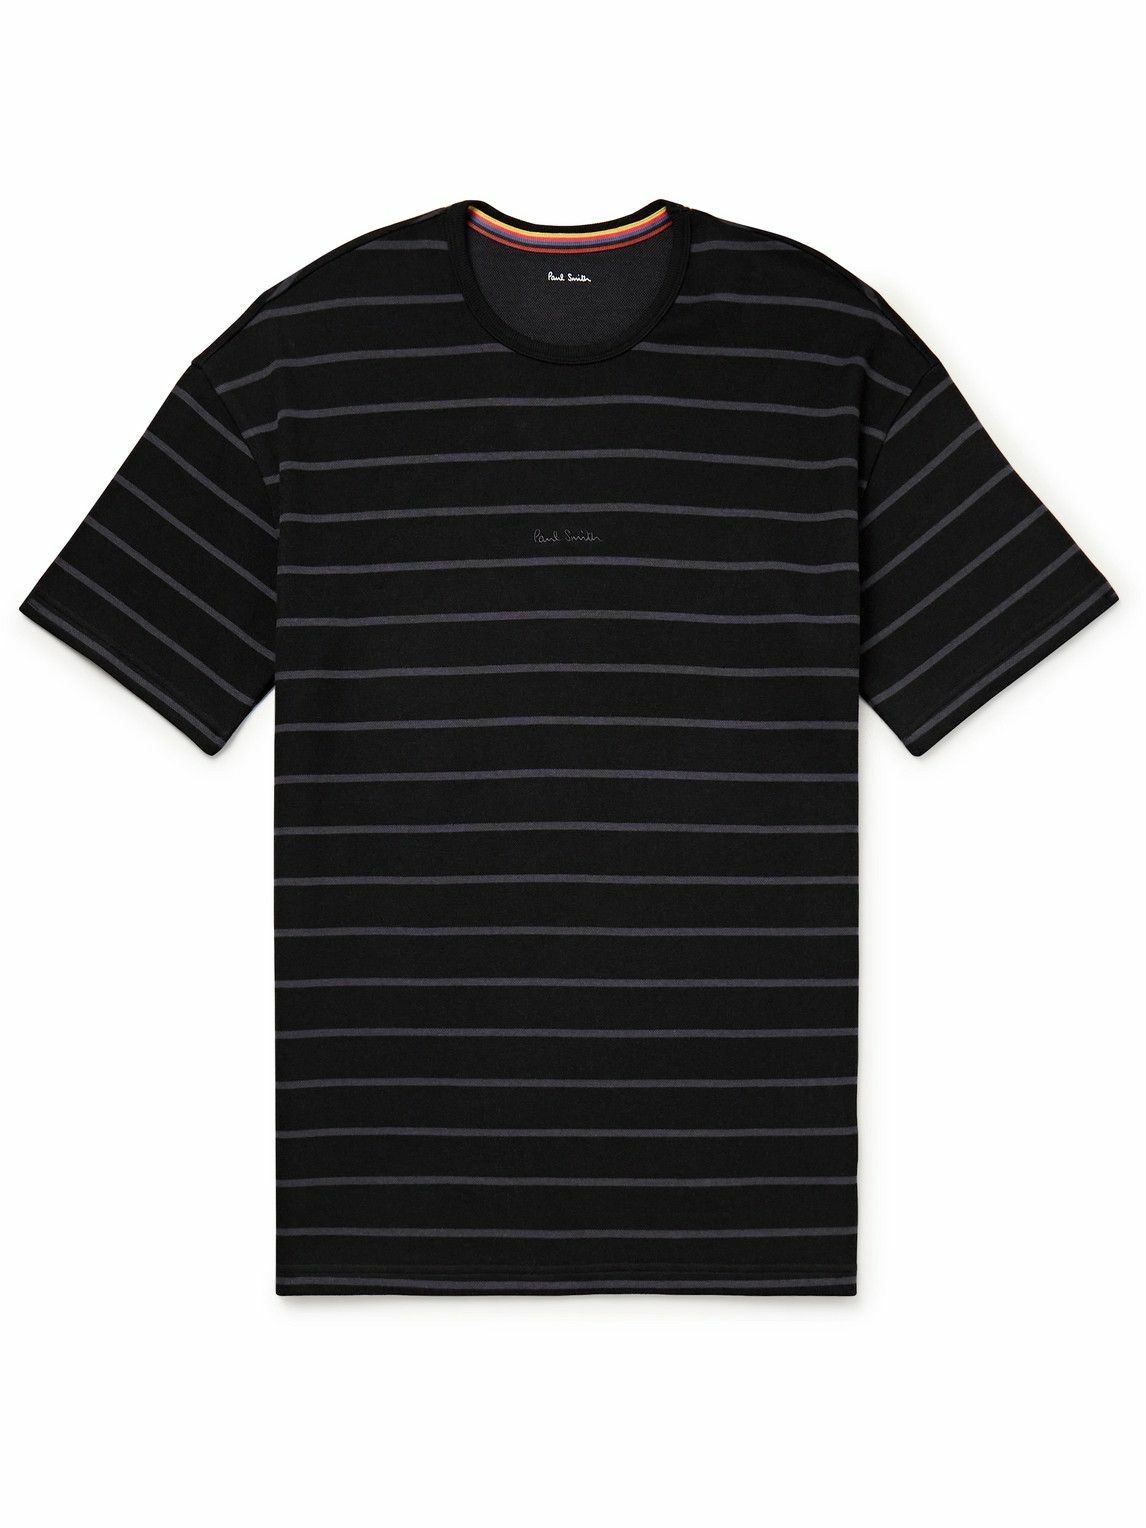 Photo: Paul Smith - Relax Logo-Embroidered Striped Cotton and Modal-Blend Jersey Pyjama T-Shirt - Black